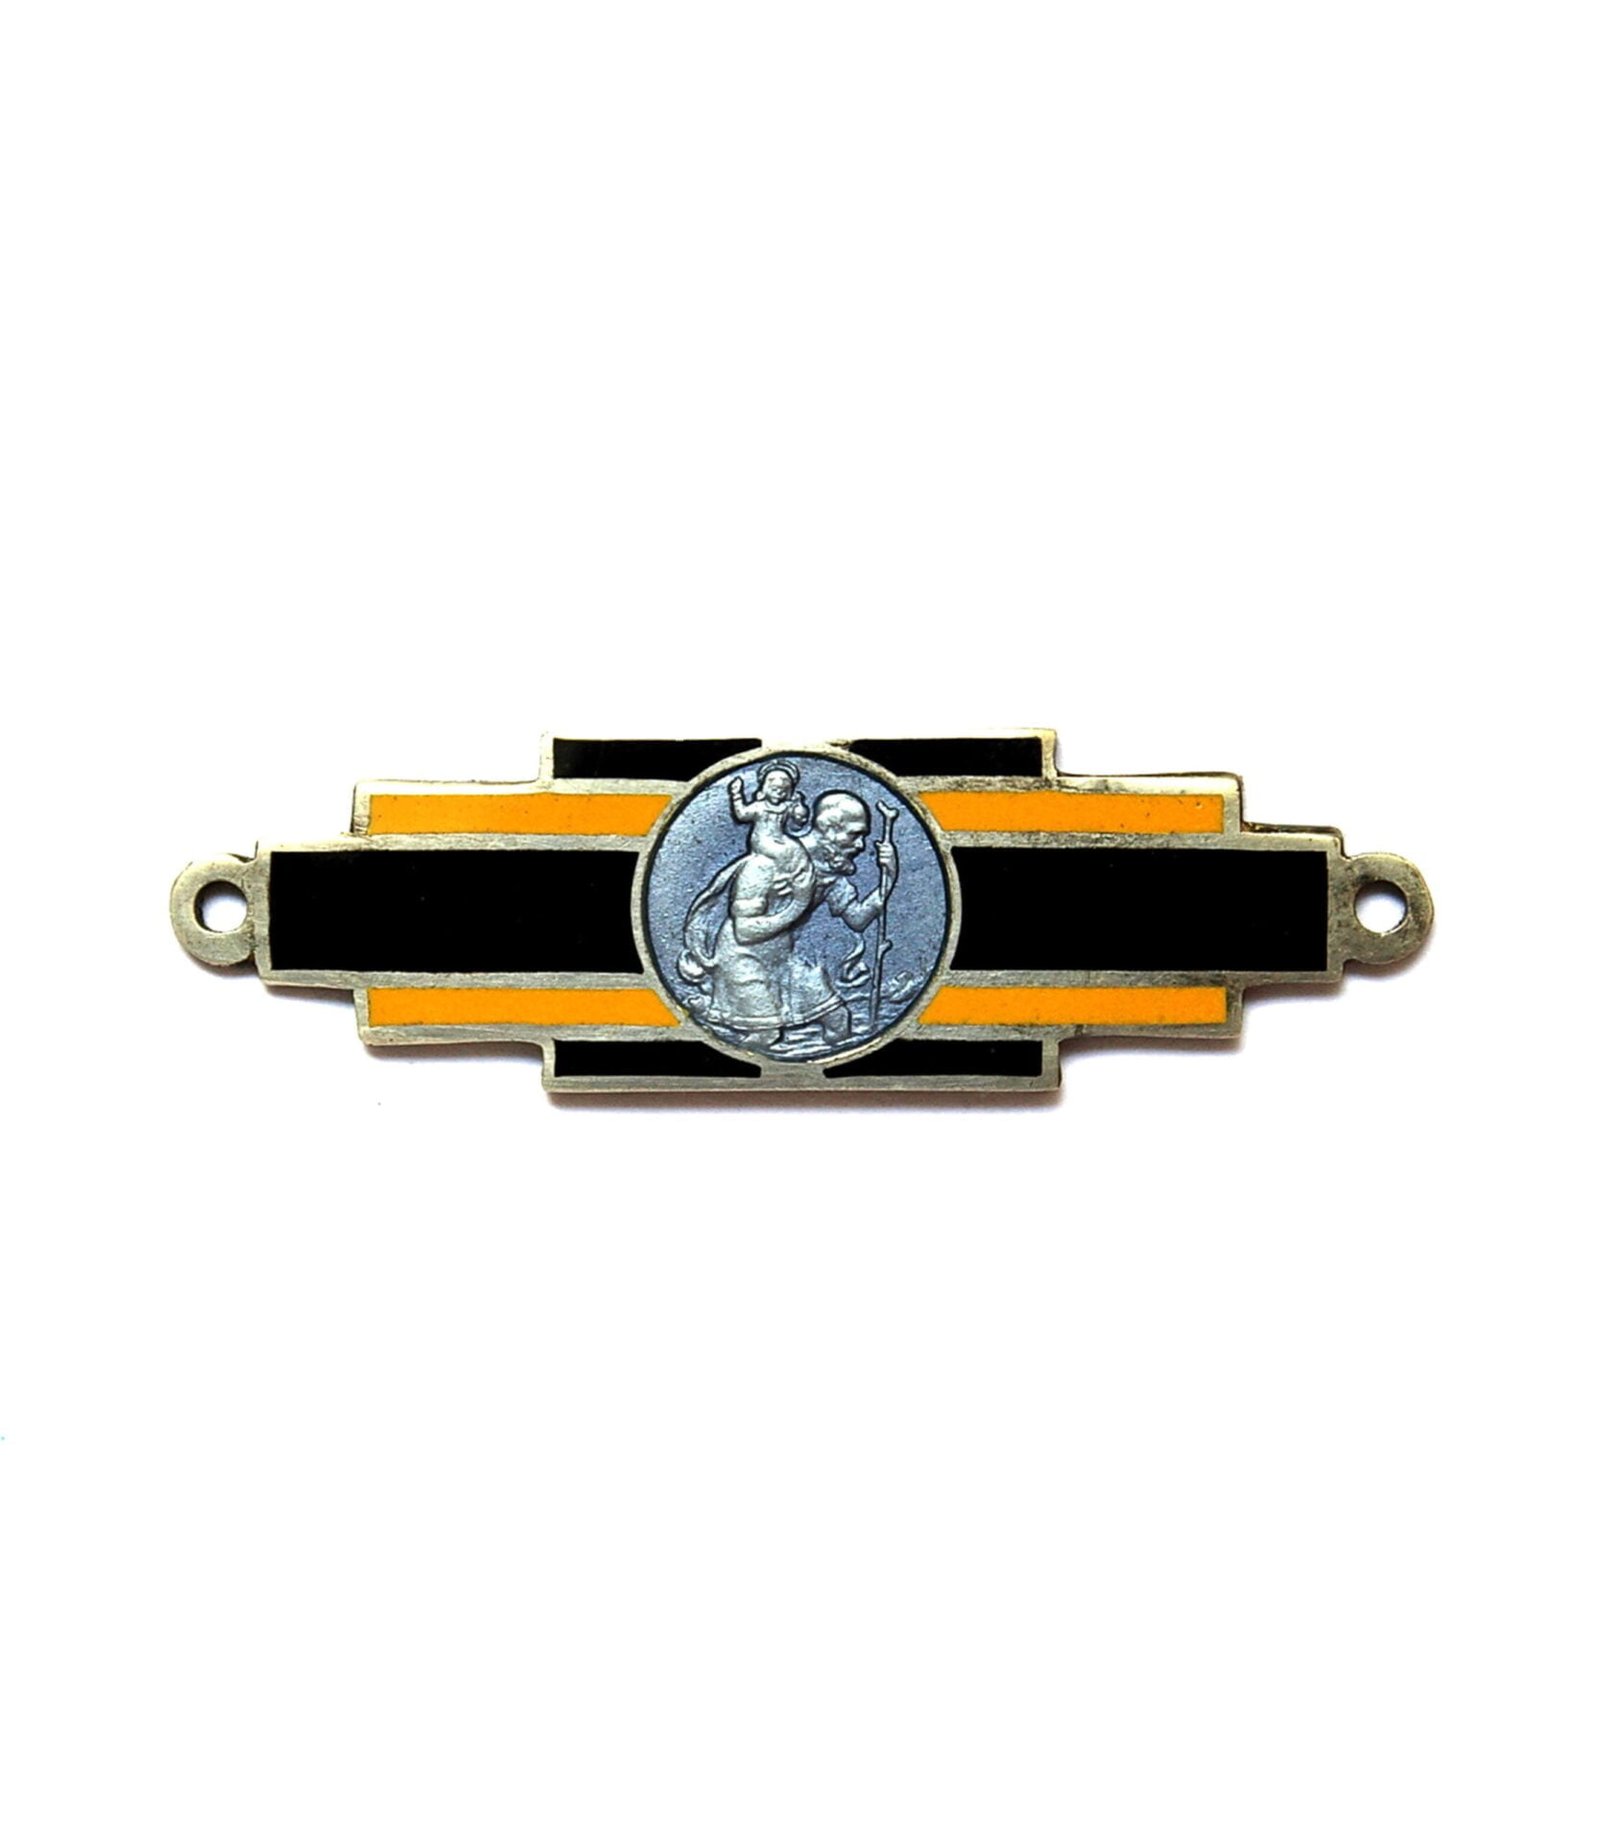 Art Deco style Saint Christopher dashboard badge. French from c.1930. The religious motif used on this piece was very popular and was used for many fine examples of that era. This design was presented in some automobile accessories' catalogs such as Établissements R.I.S.O. (1933-1934). Measures 45mm x 15mm. Solid silver with enamel finish. This same badge is described and photographed in Maximiliano Garay 's book " Saint Christophe - dashboard badges of the golden era of motoring " on page 181.